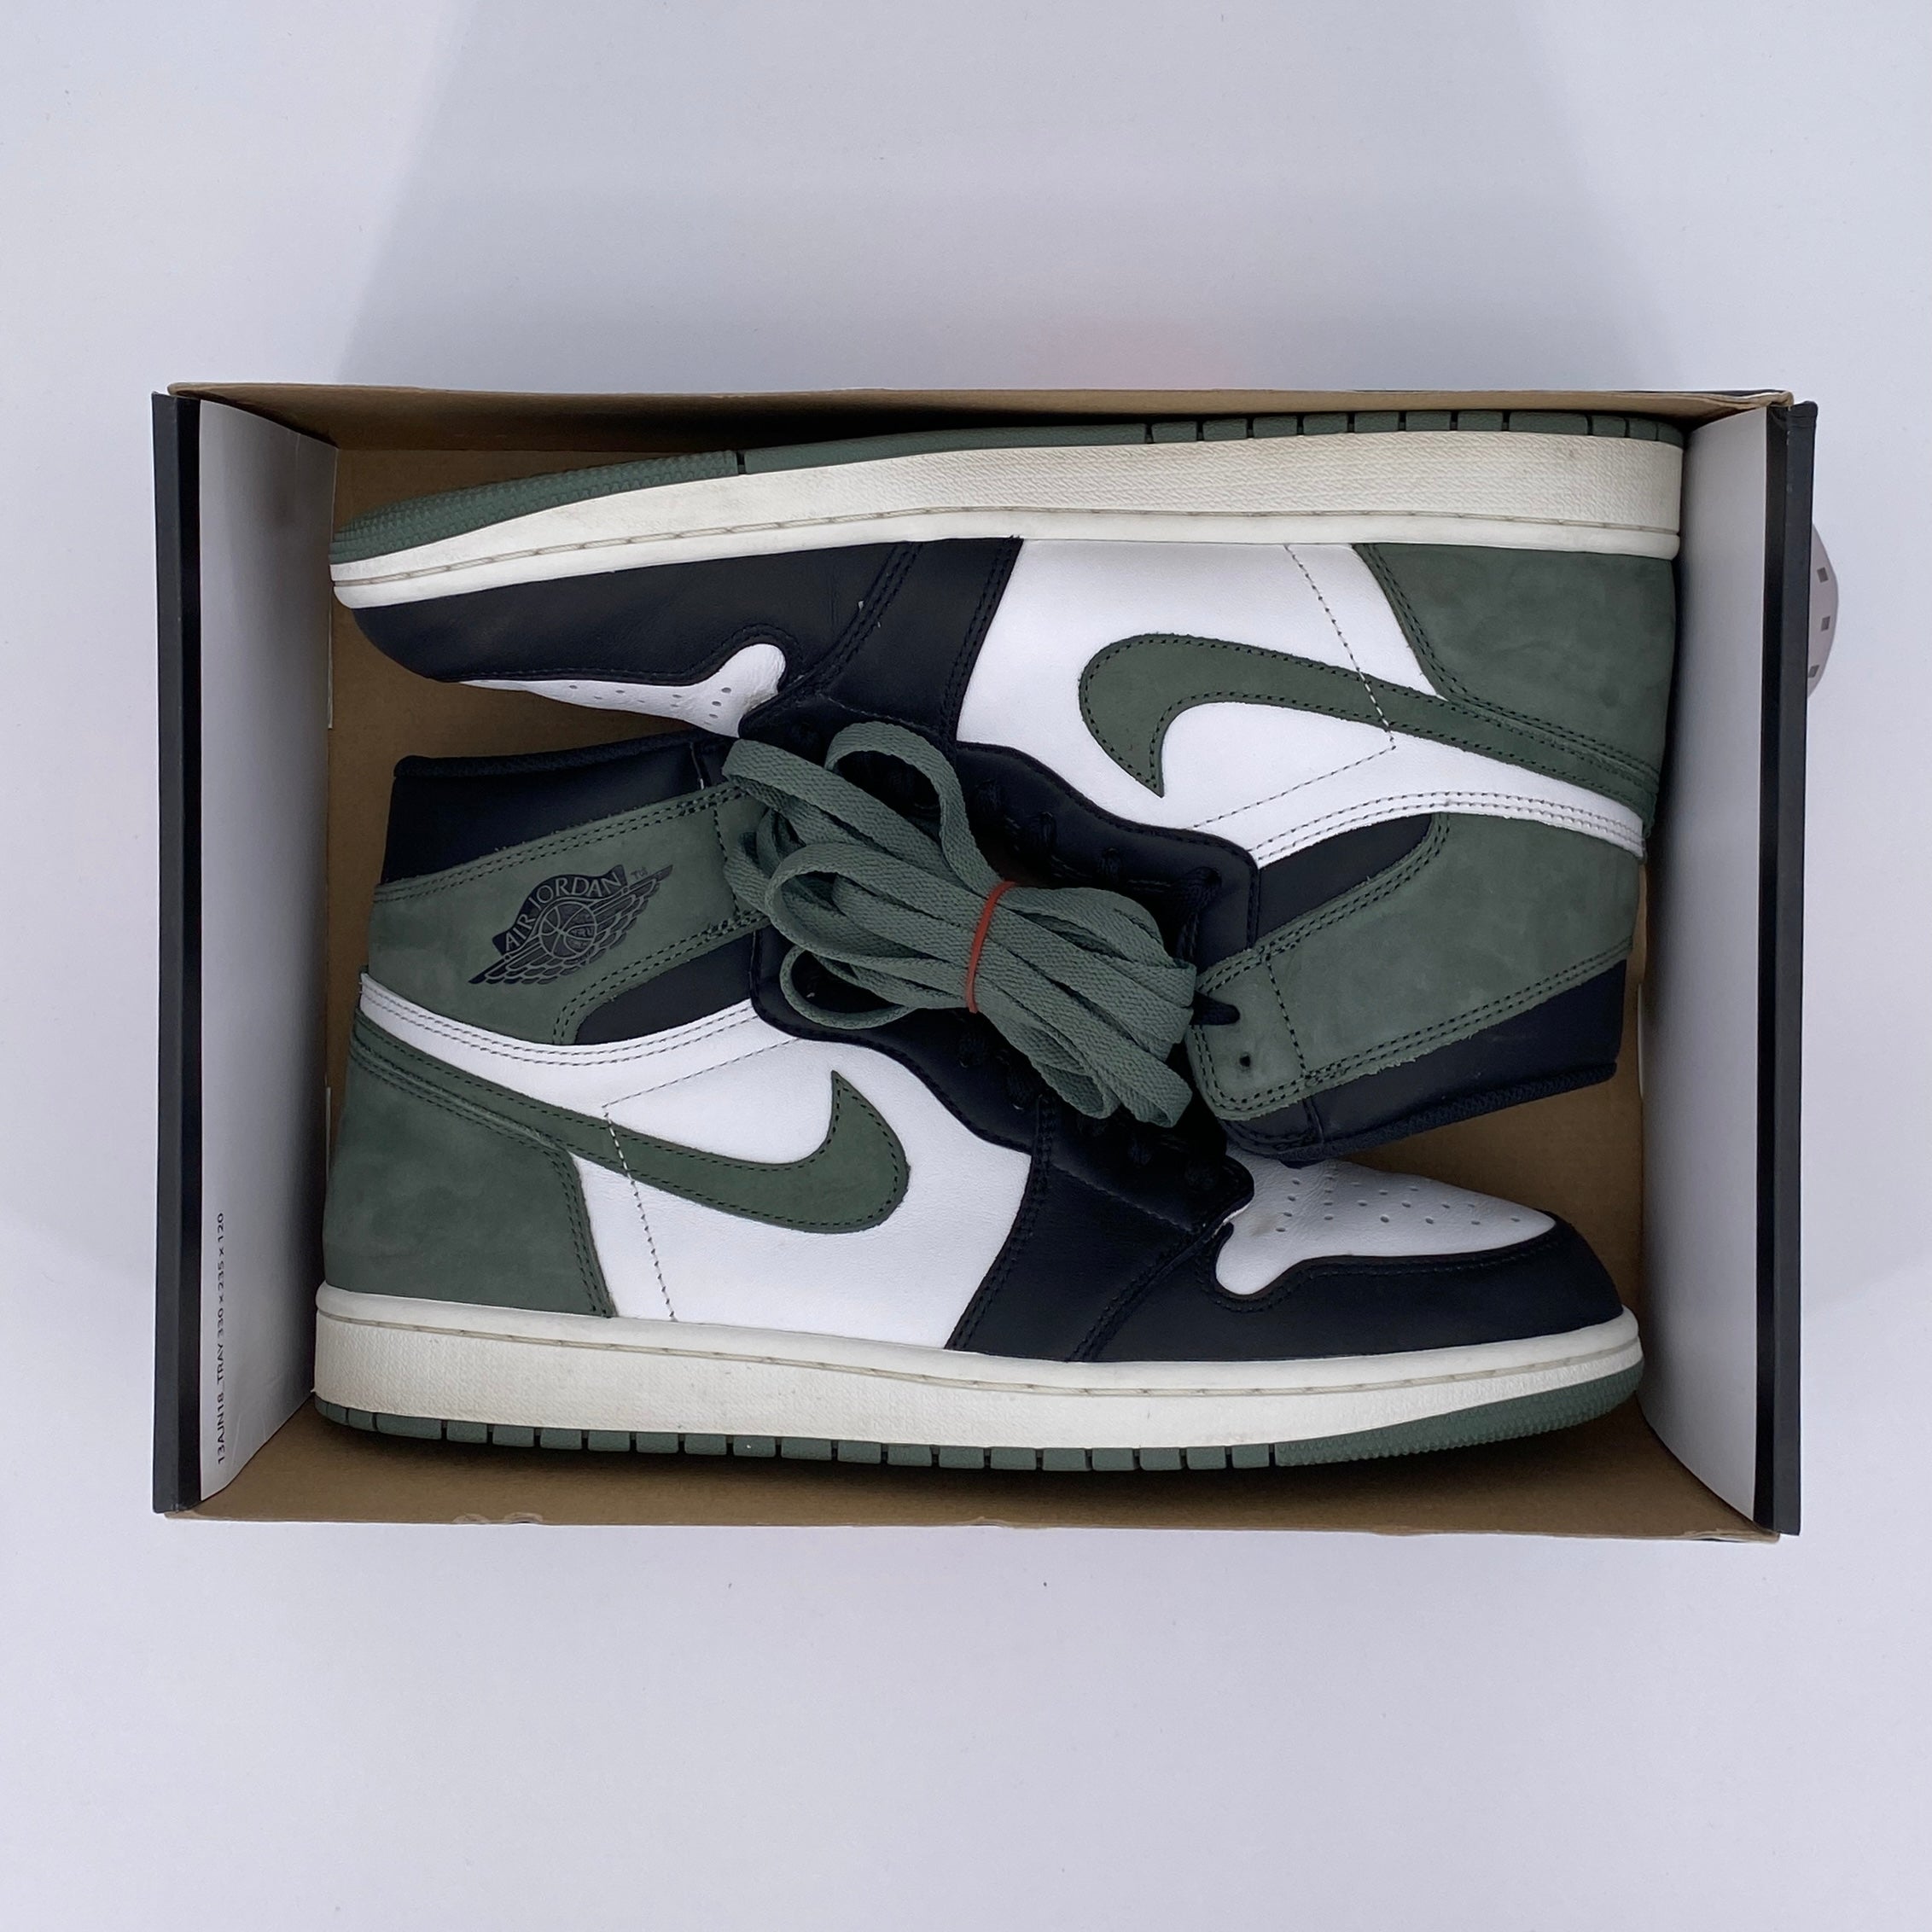 Air Jordan 1 Retro High OG &quot;Clay Green&quot; 2018 Used Size 11.5